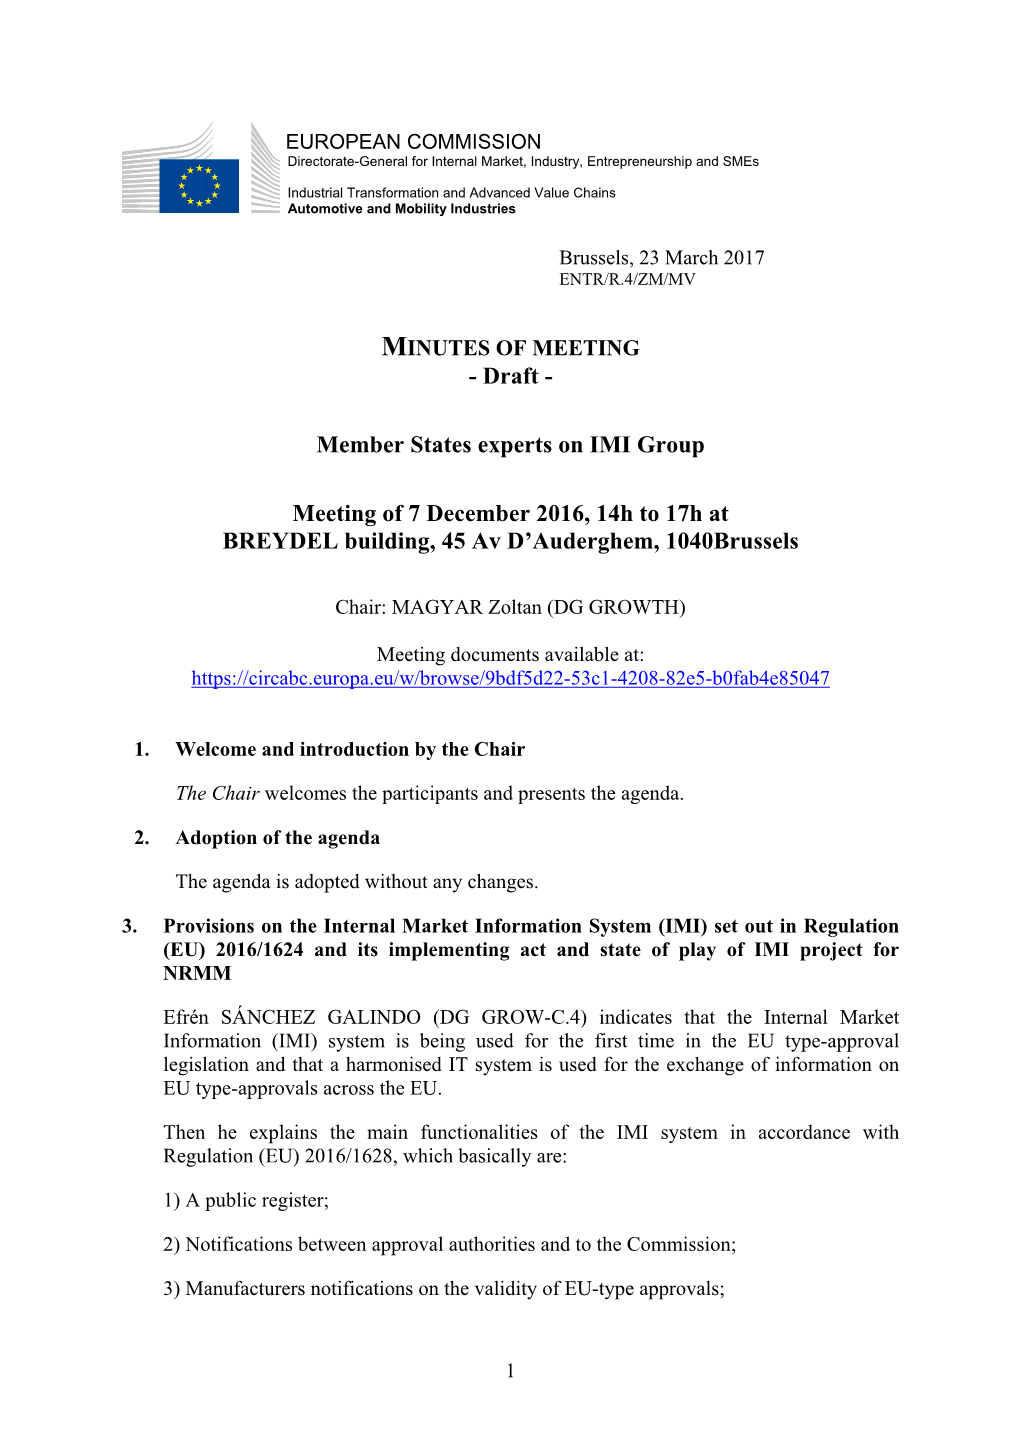 Member States Experts on IMI Group Meeting of 7 December 2016, 14H